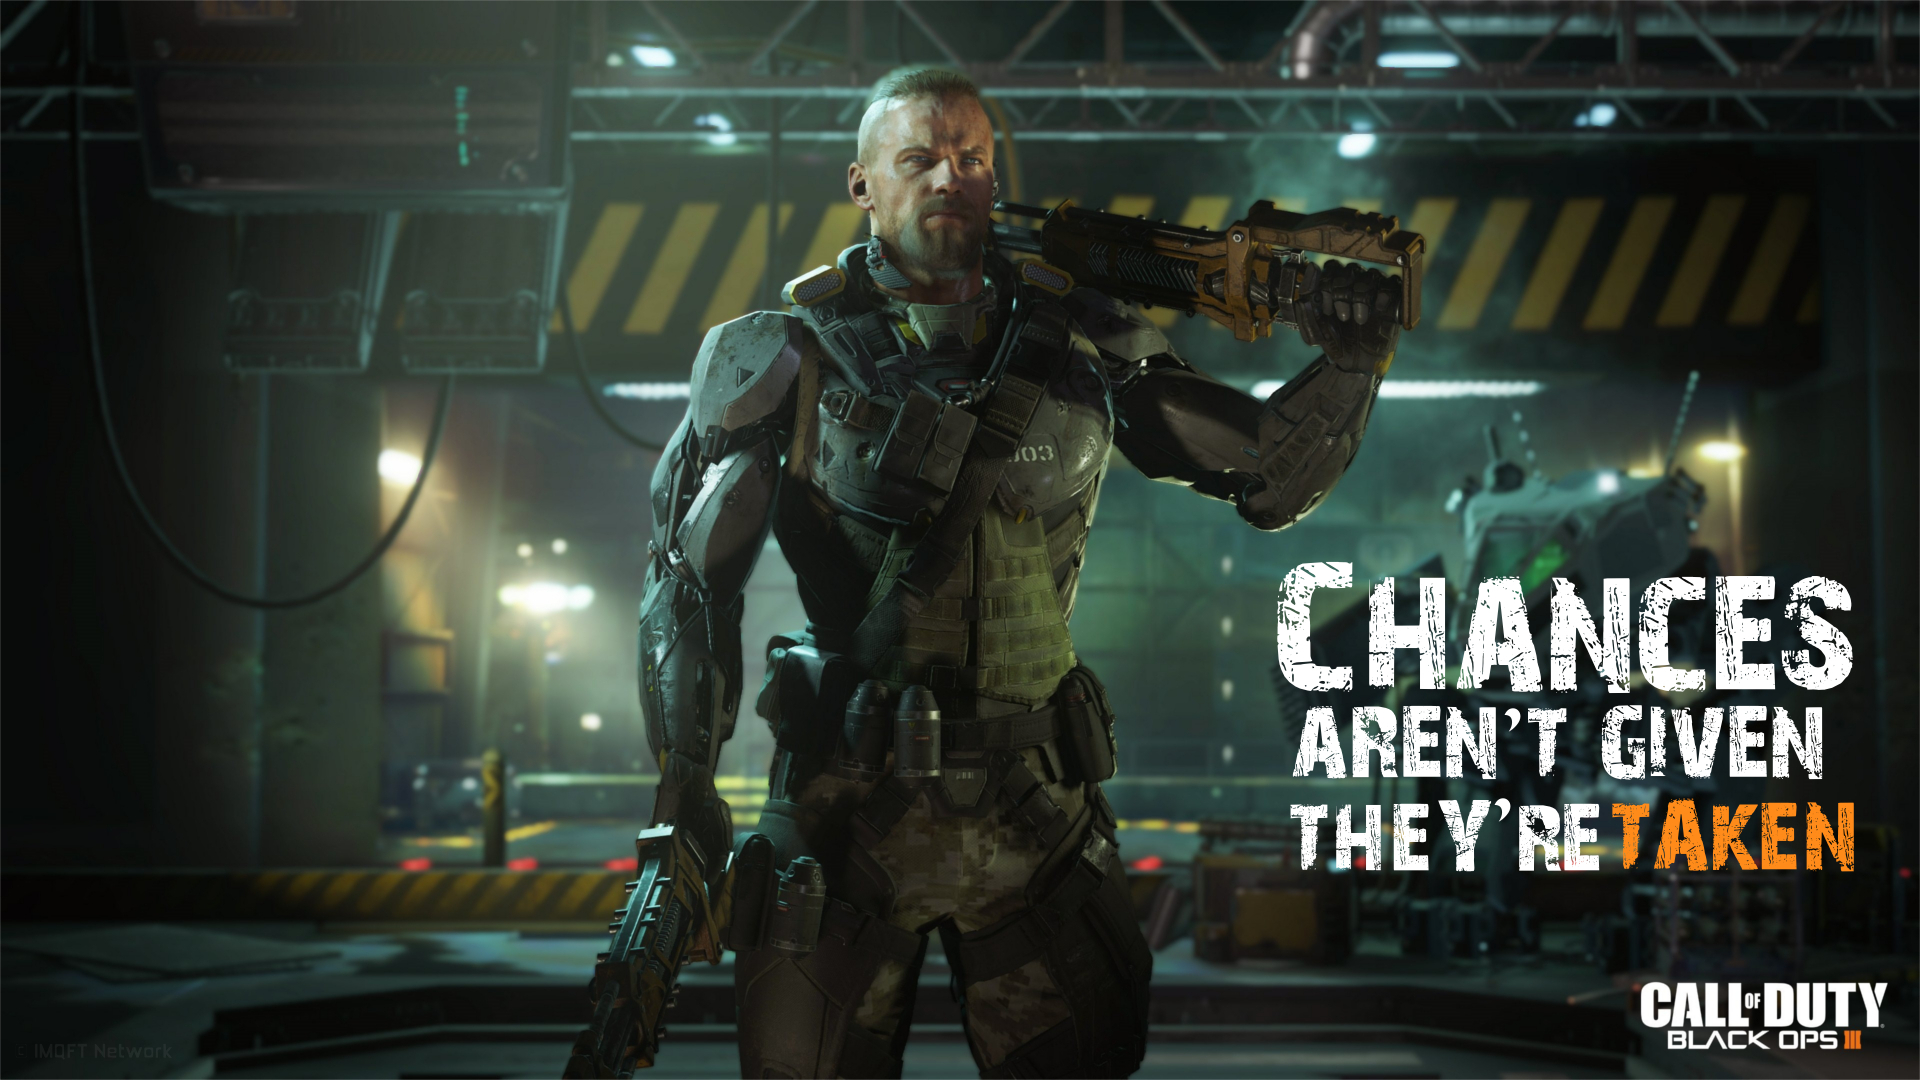 video game, call of duty: black ops iii, call of duty, quote